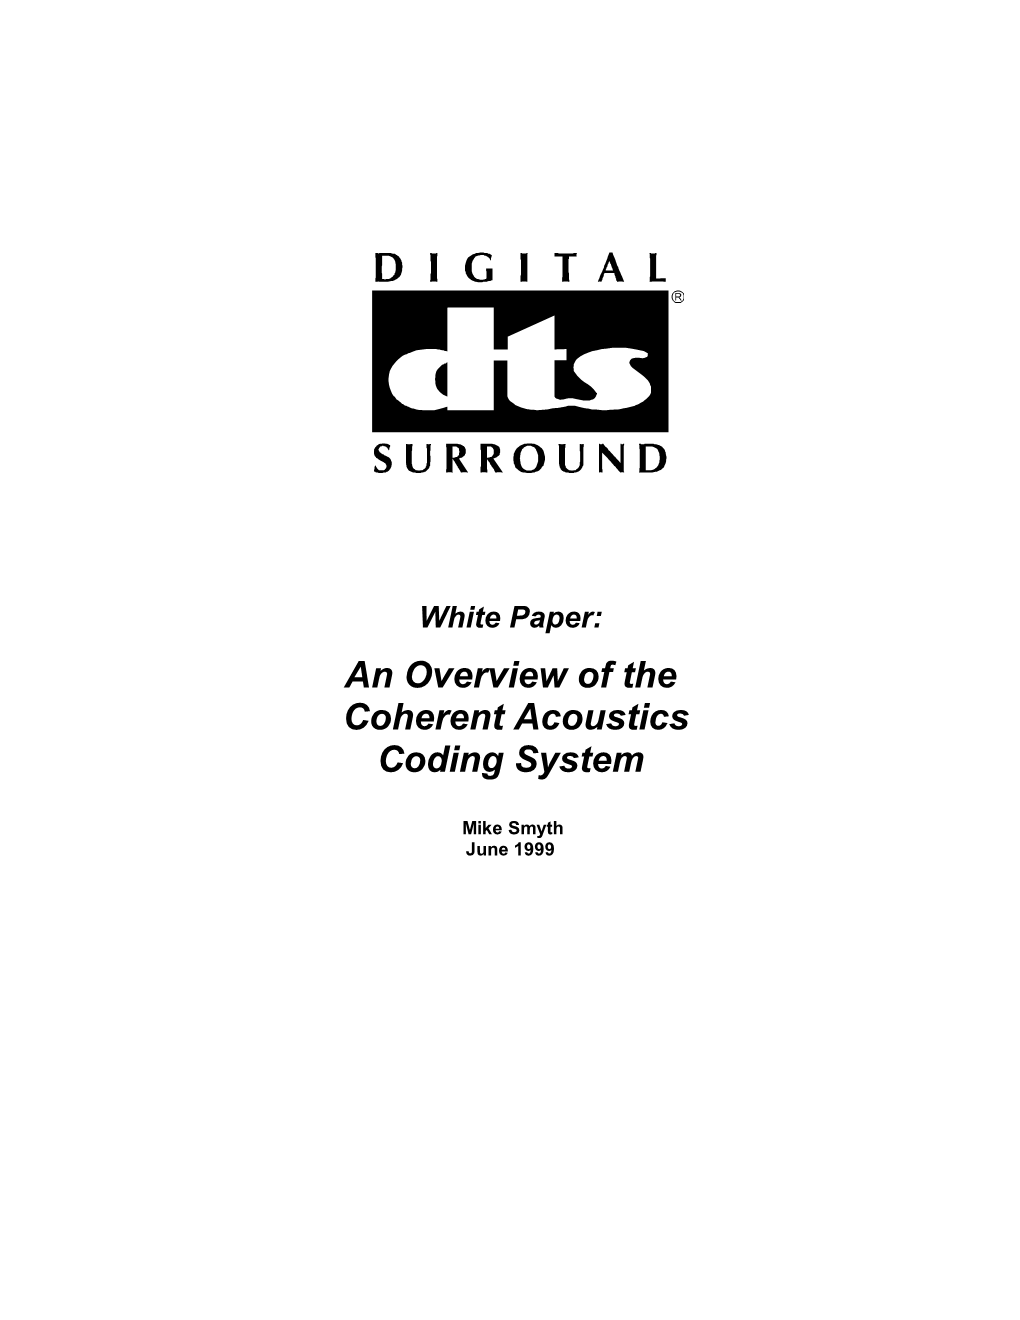 White Paper: an Overview of the Coherent Acoustics Coding System